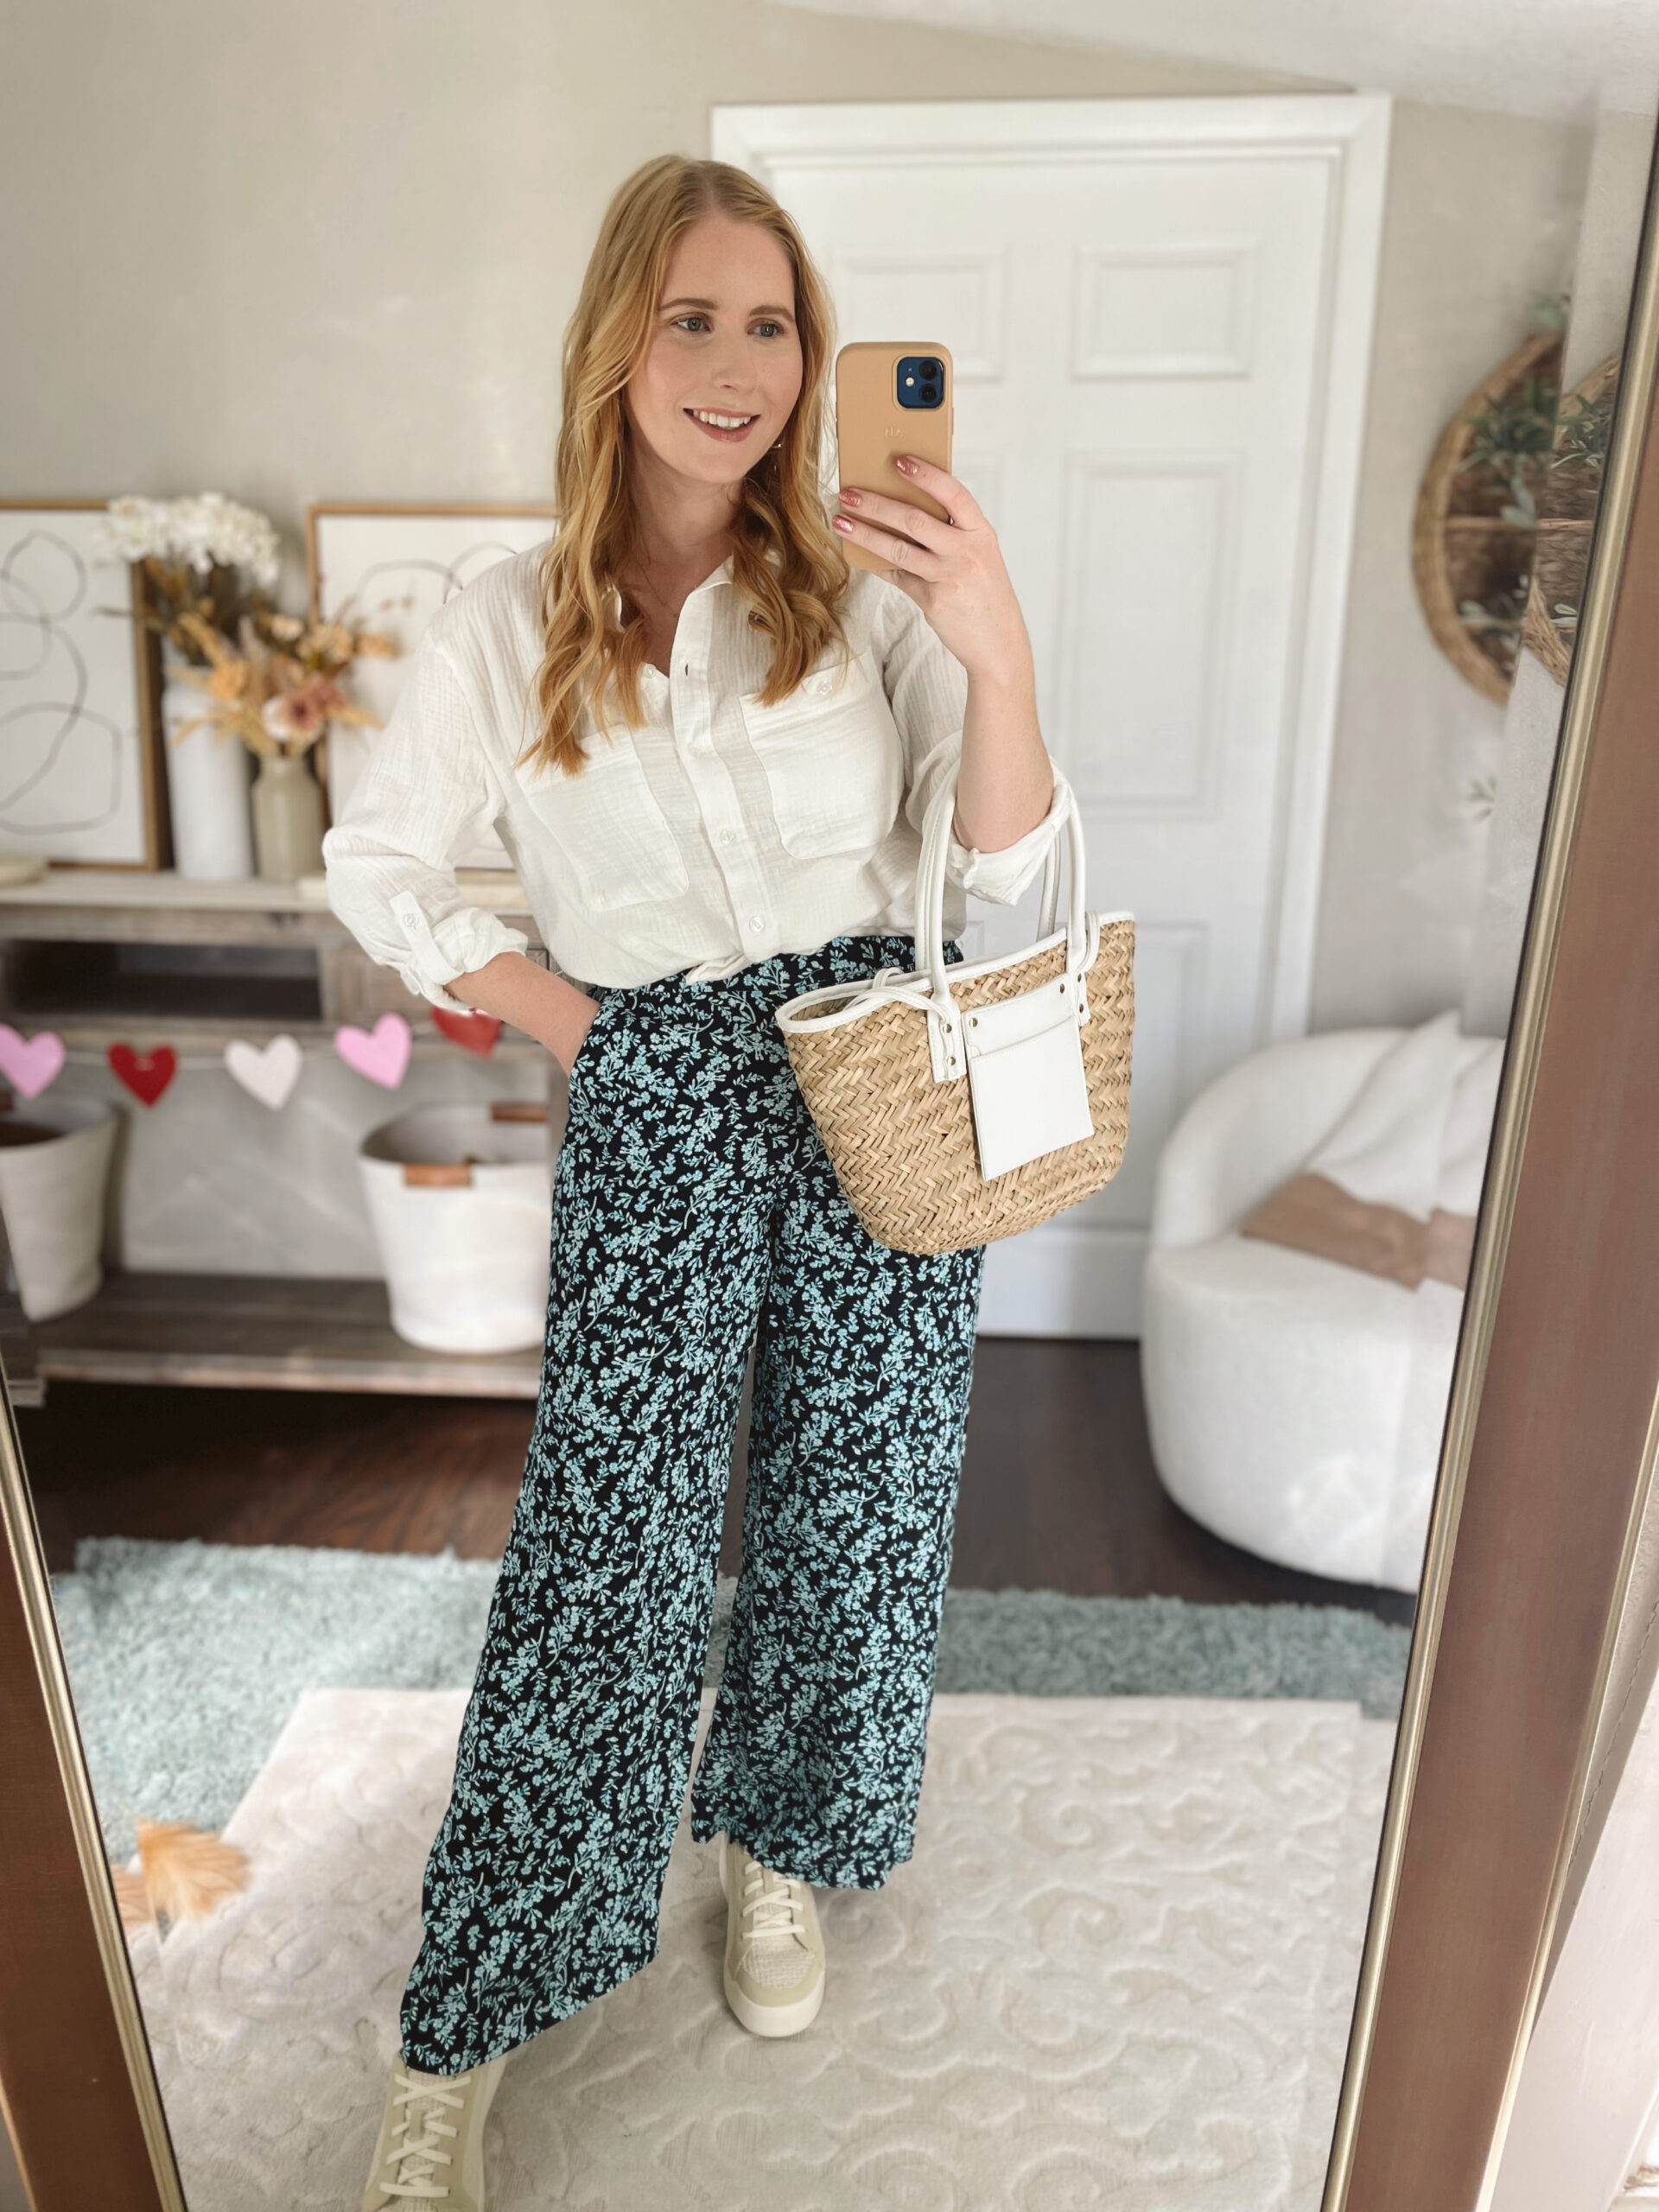 Fluid Wide Leg Pants in Floral, White Button Down | 10 Best Cruise Outfits ideas in 2023 - 10 Cruise Outfit Ideas for Women - 10 Day Caribbean Cruise Mid Size Outfit Ideas 